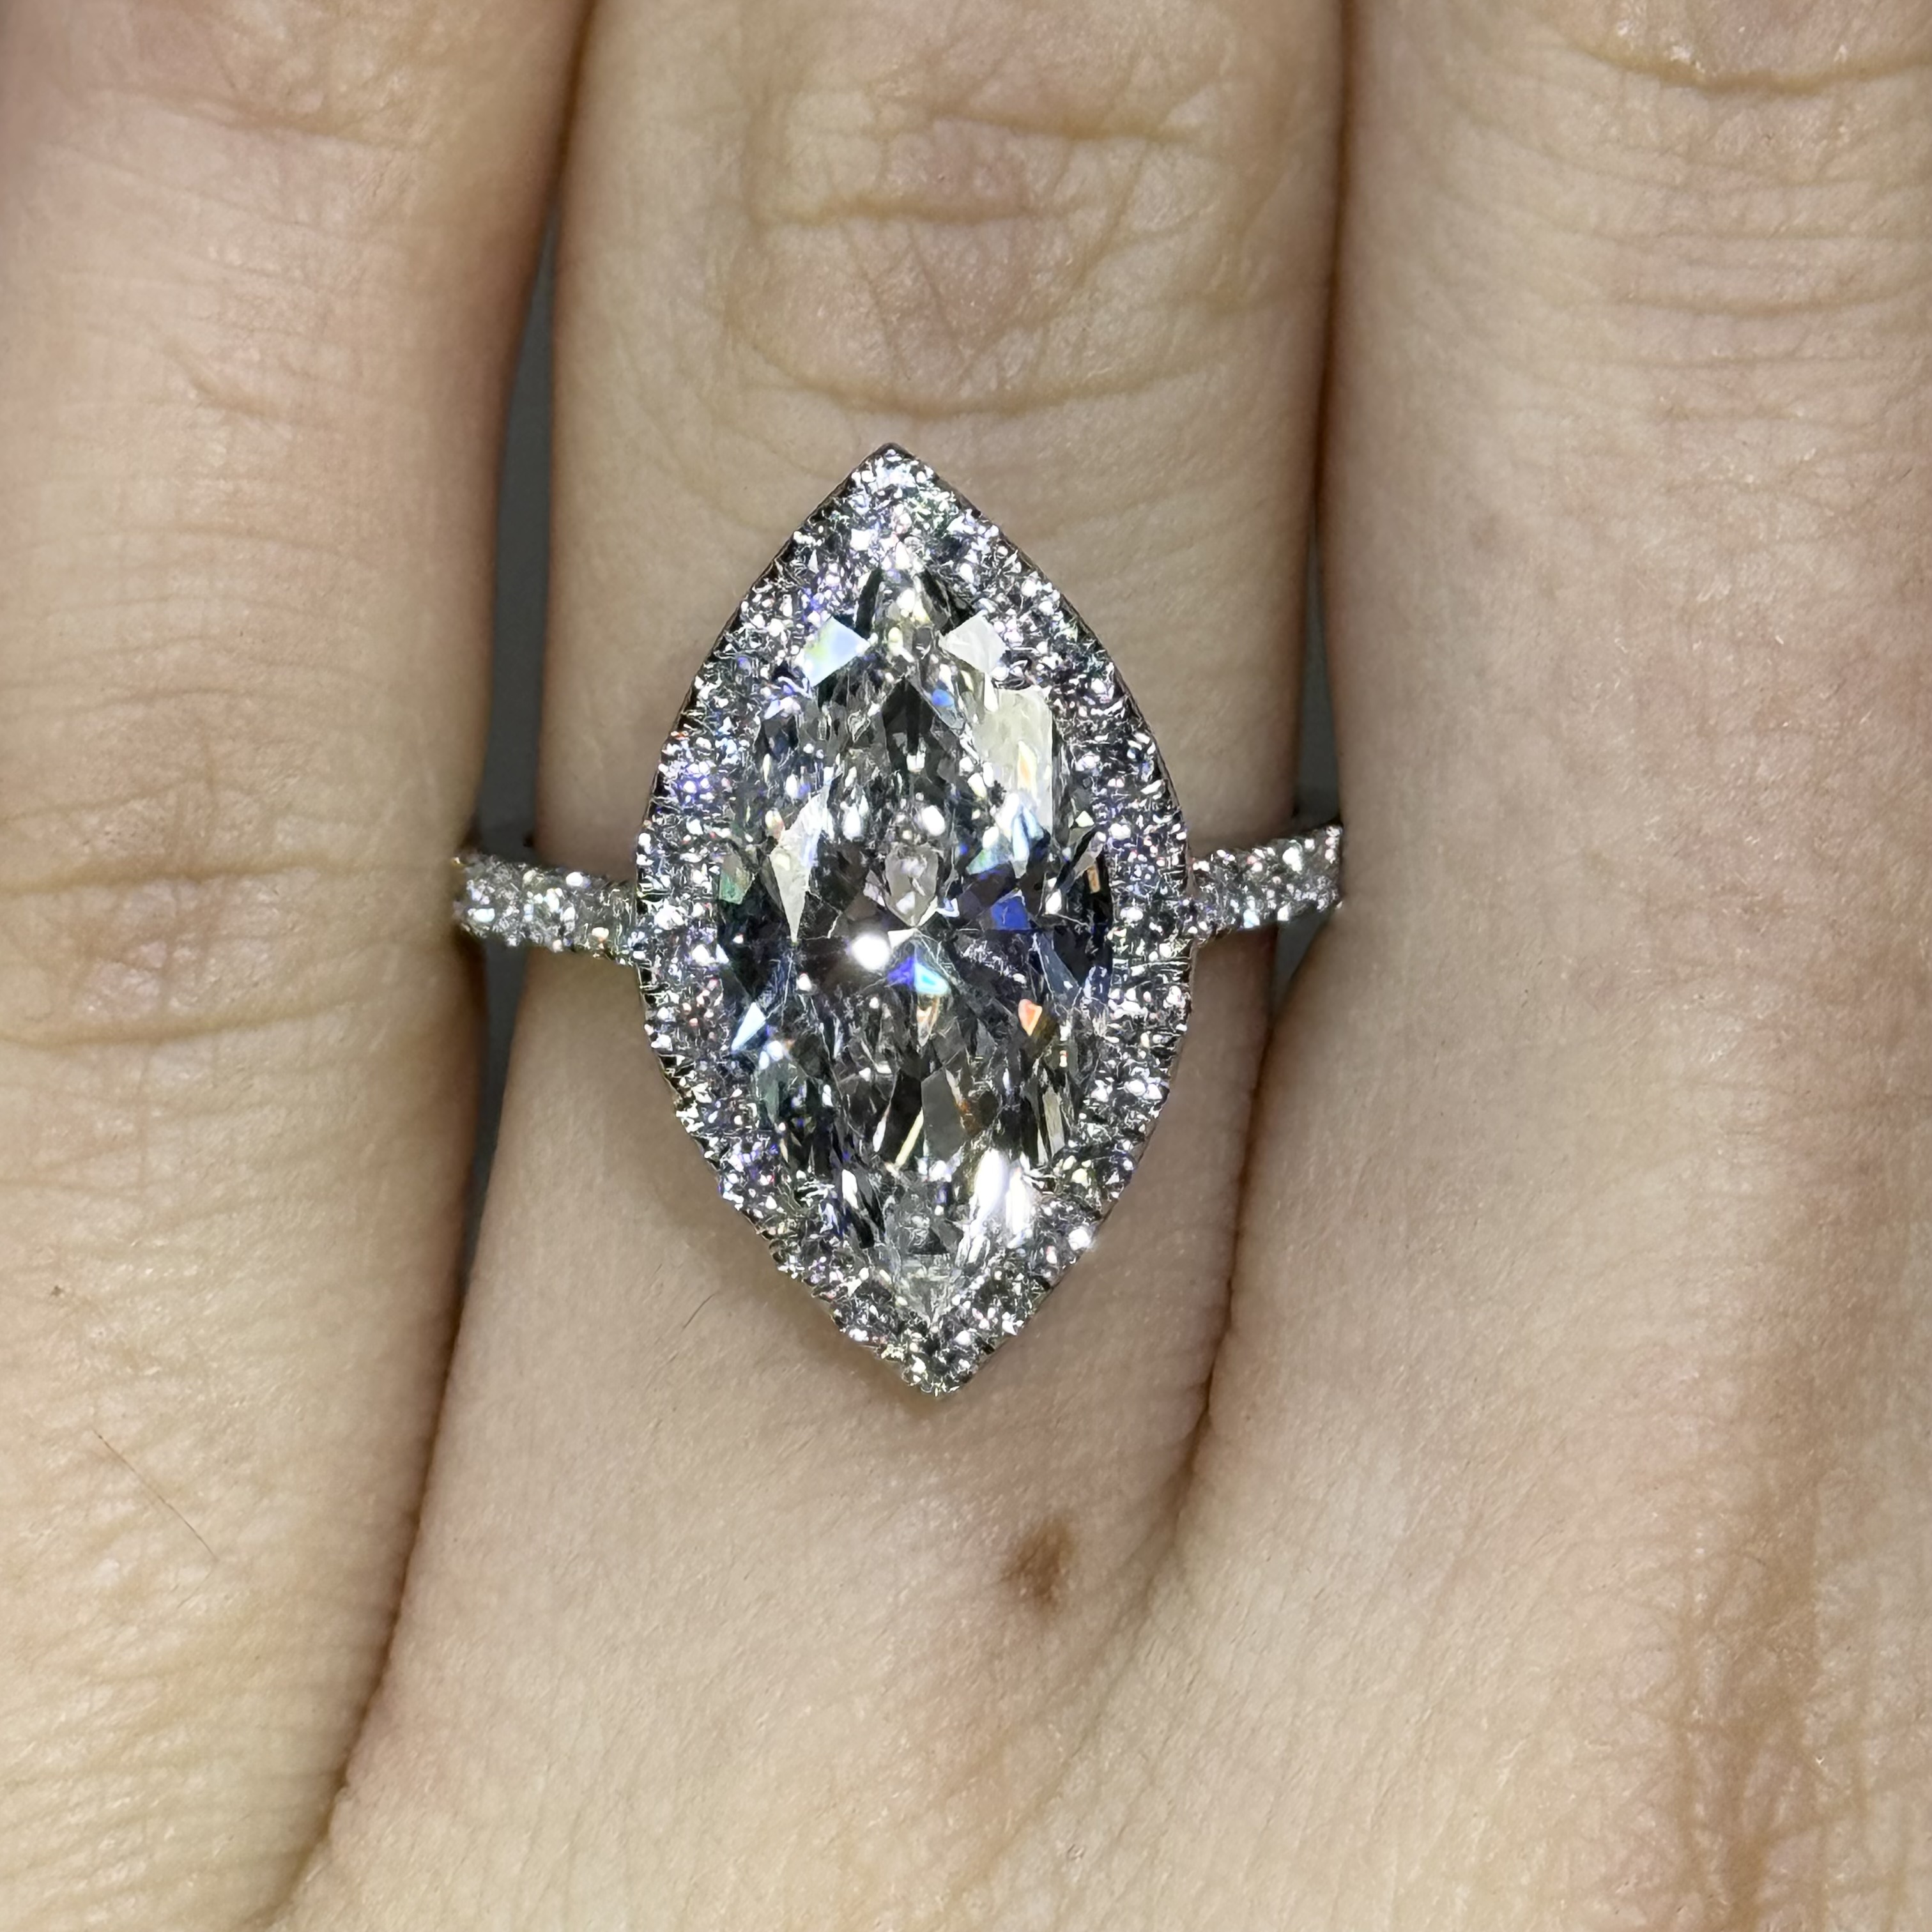 GIA 3.56ct F VS1 Marquise "Jackie" Engagement Ring Image 2 Forever Diamonds New York, NY